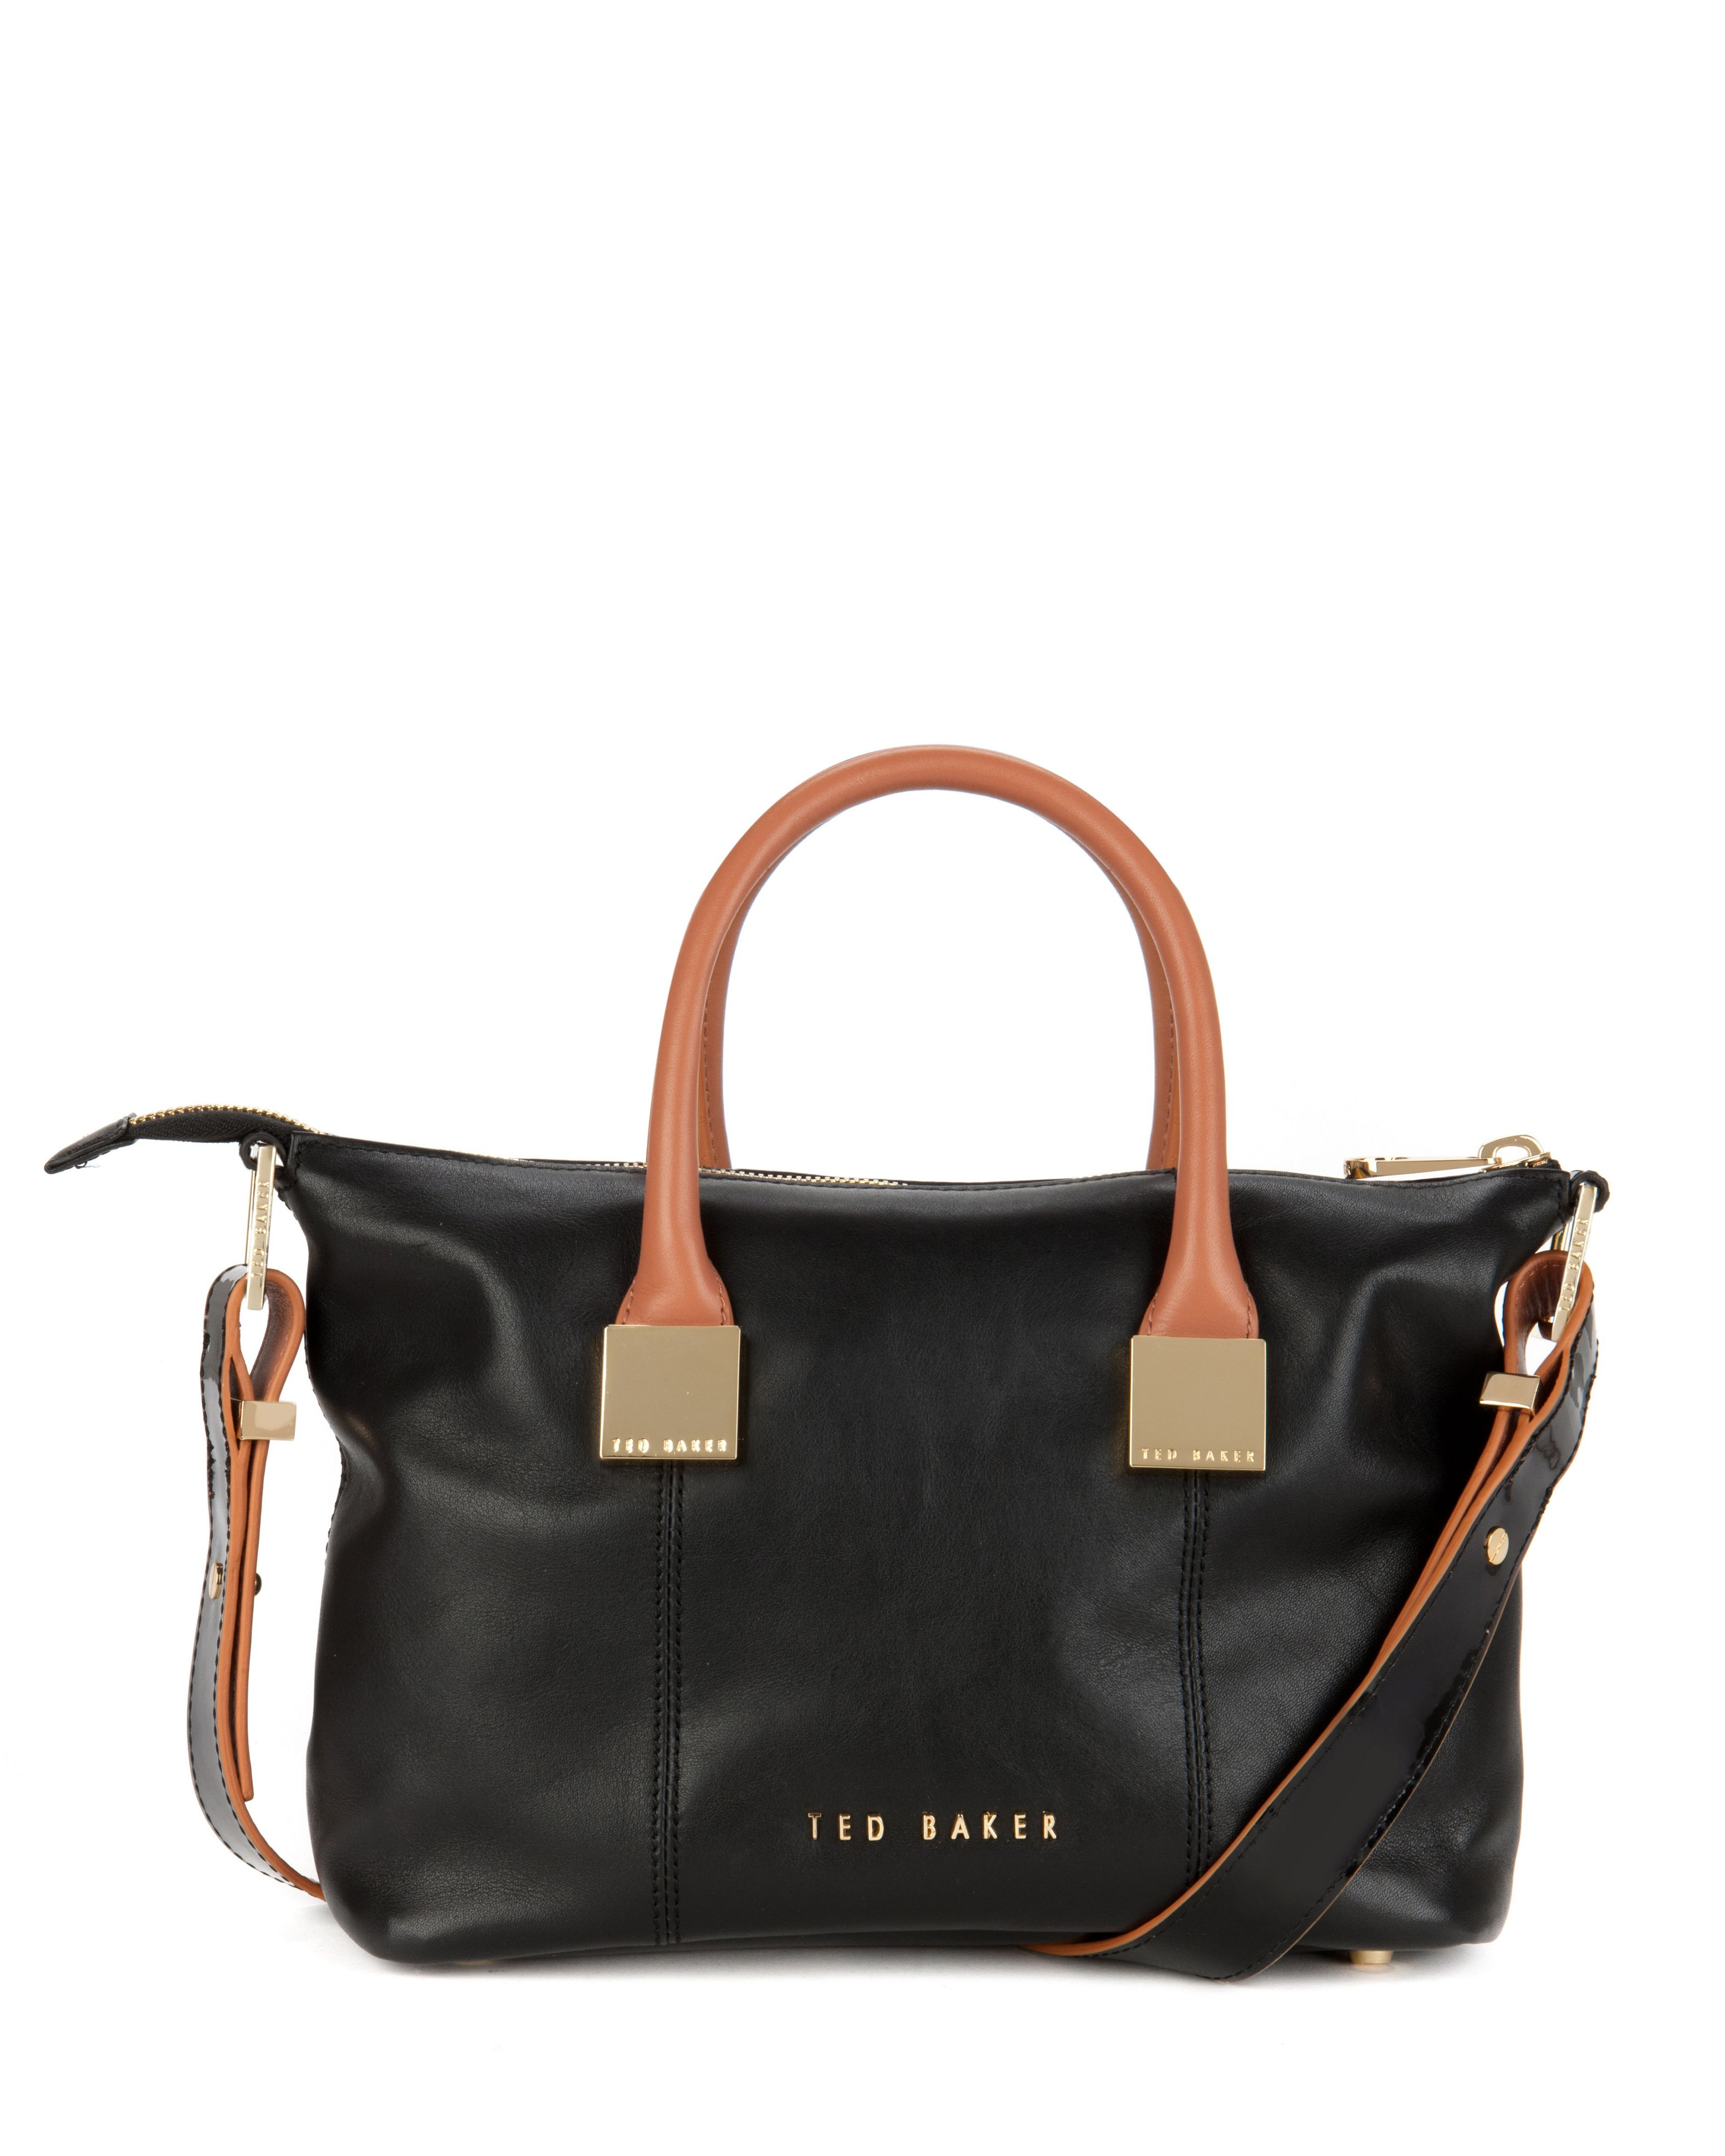 Ted Baker Felmar Small Leather Tote Bag in Black | Lyst